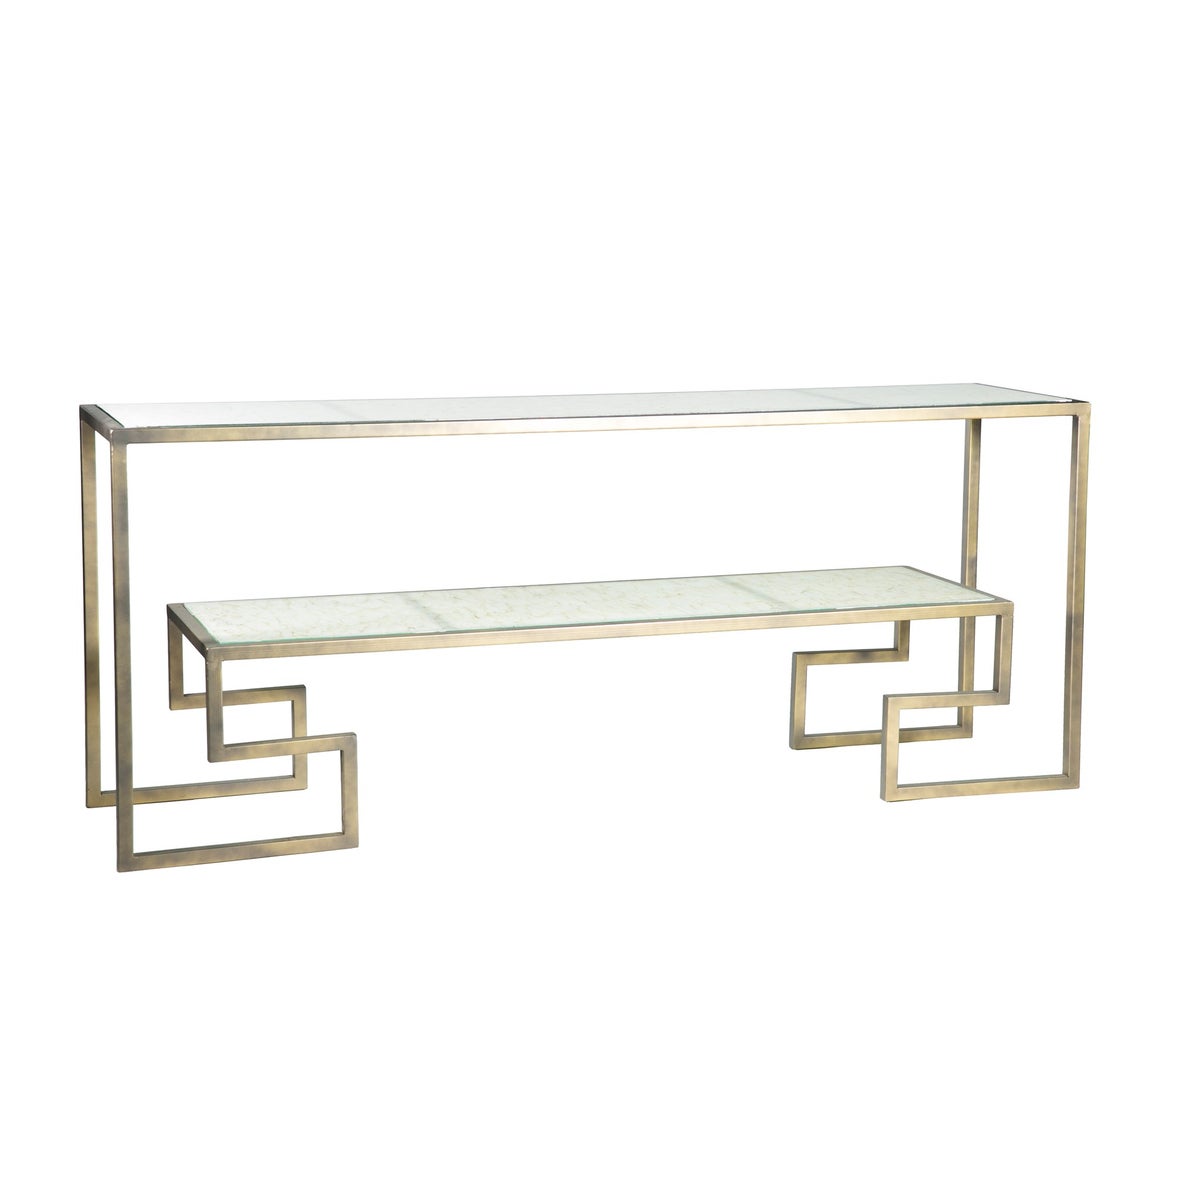 Greek Key Console Table in Antique Gold with Glass Shelves in Wrinkled Linen